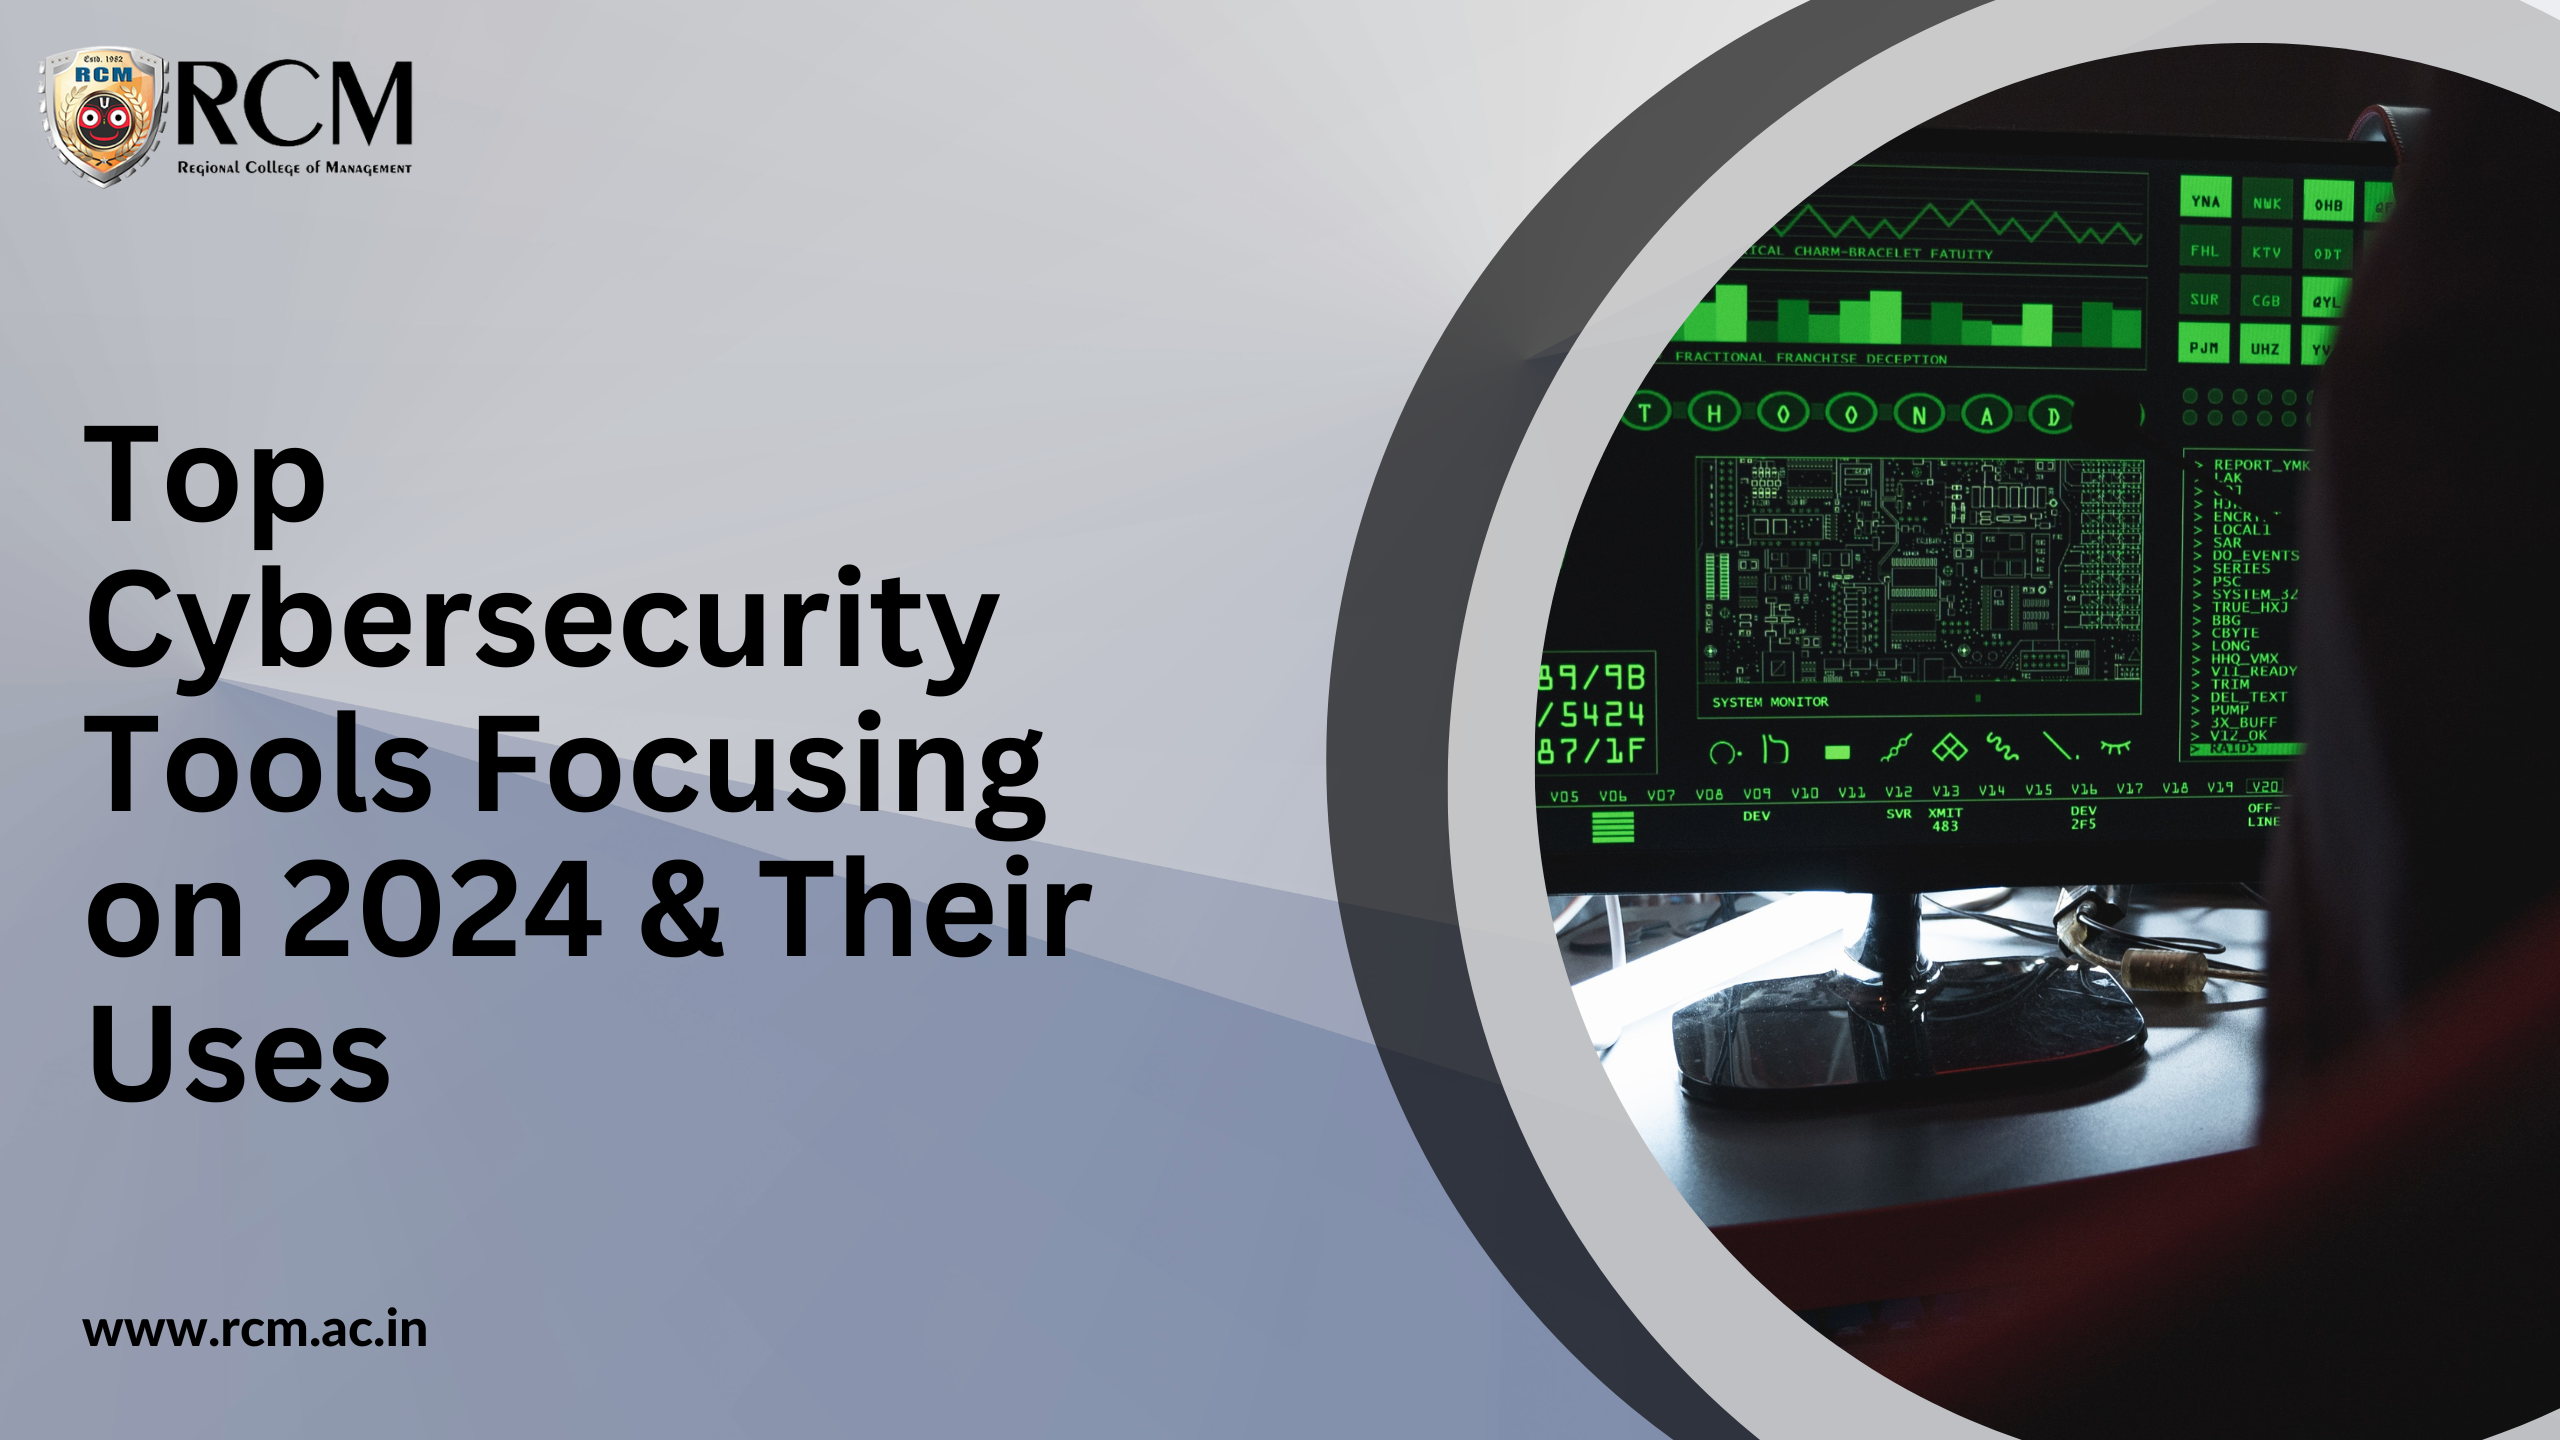 You are currently viewing Top Cybersecurity Tools Focusing on 2024 & Their Uses